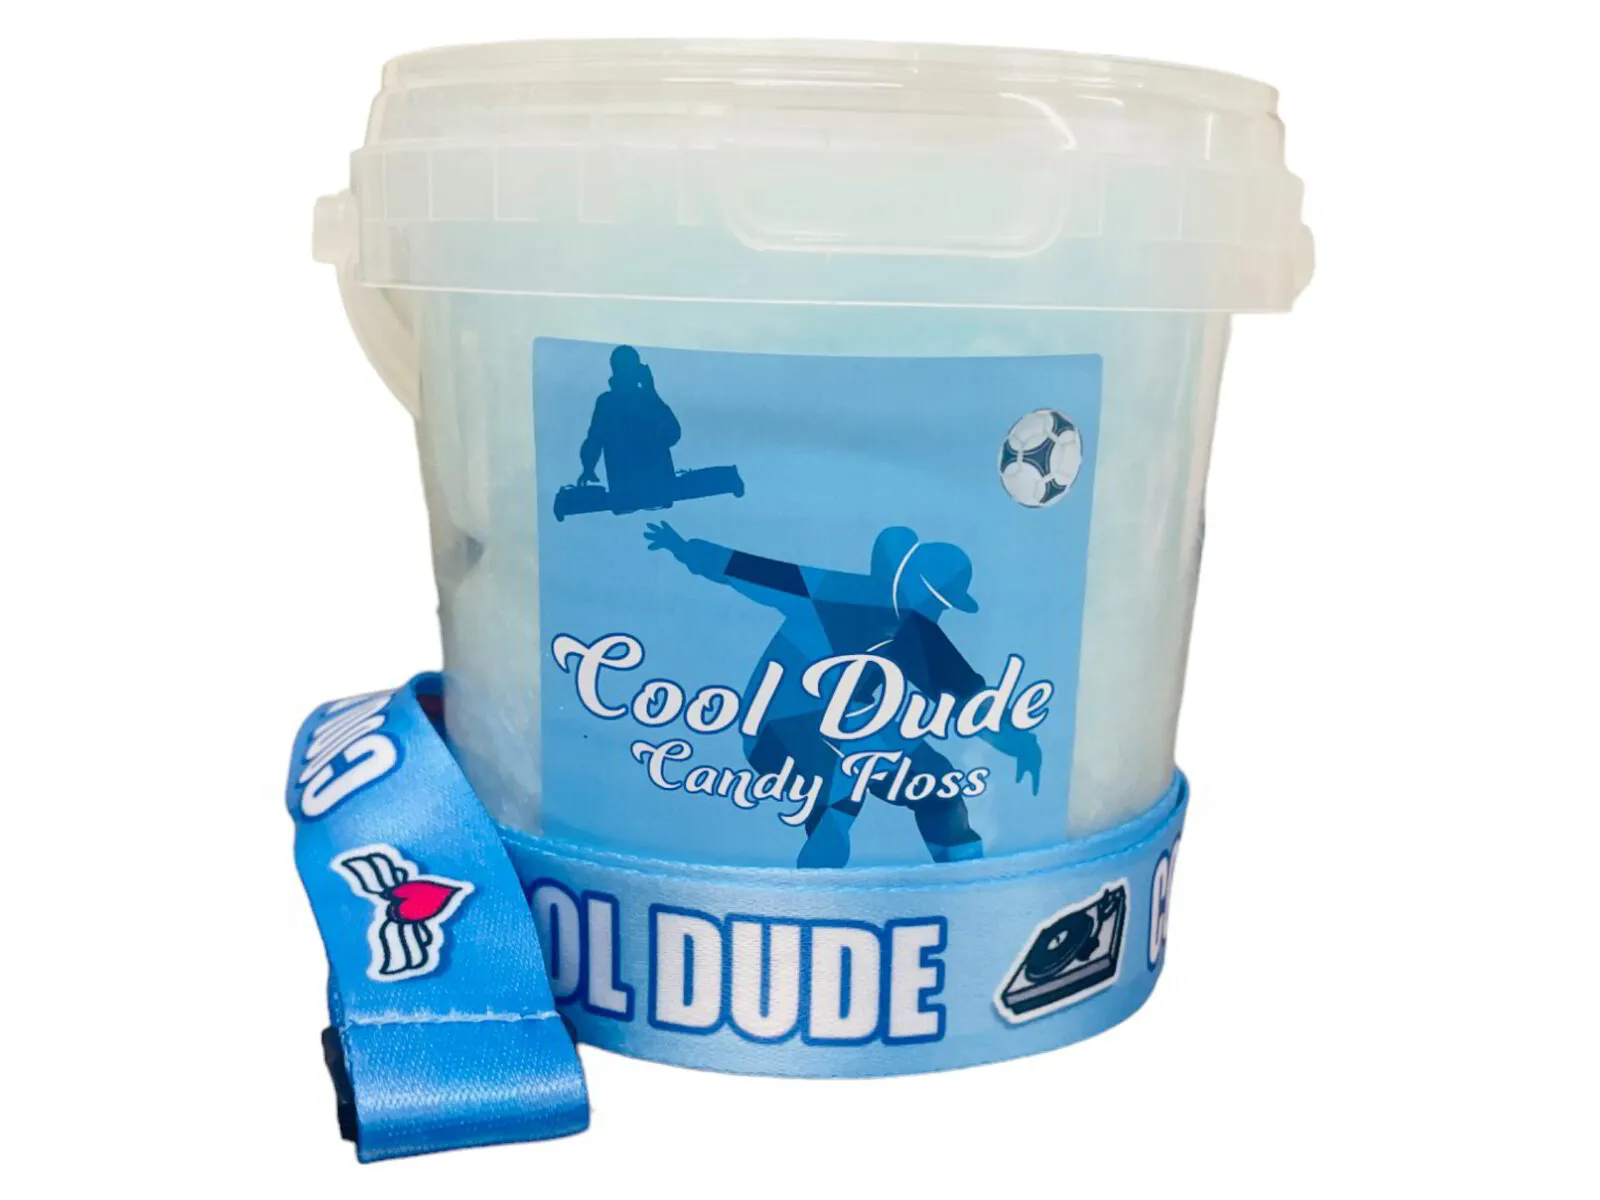 12x Cool Dude Candy Floss Tubs with Lanyard